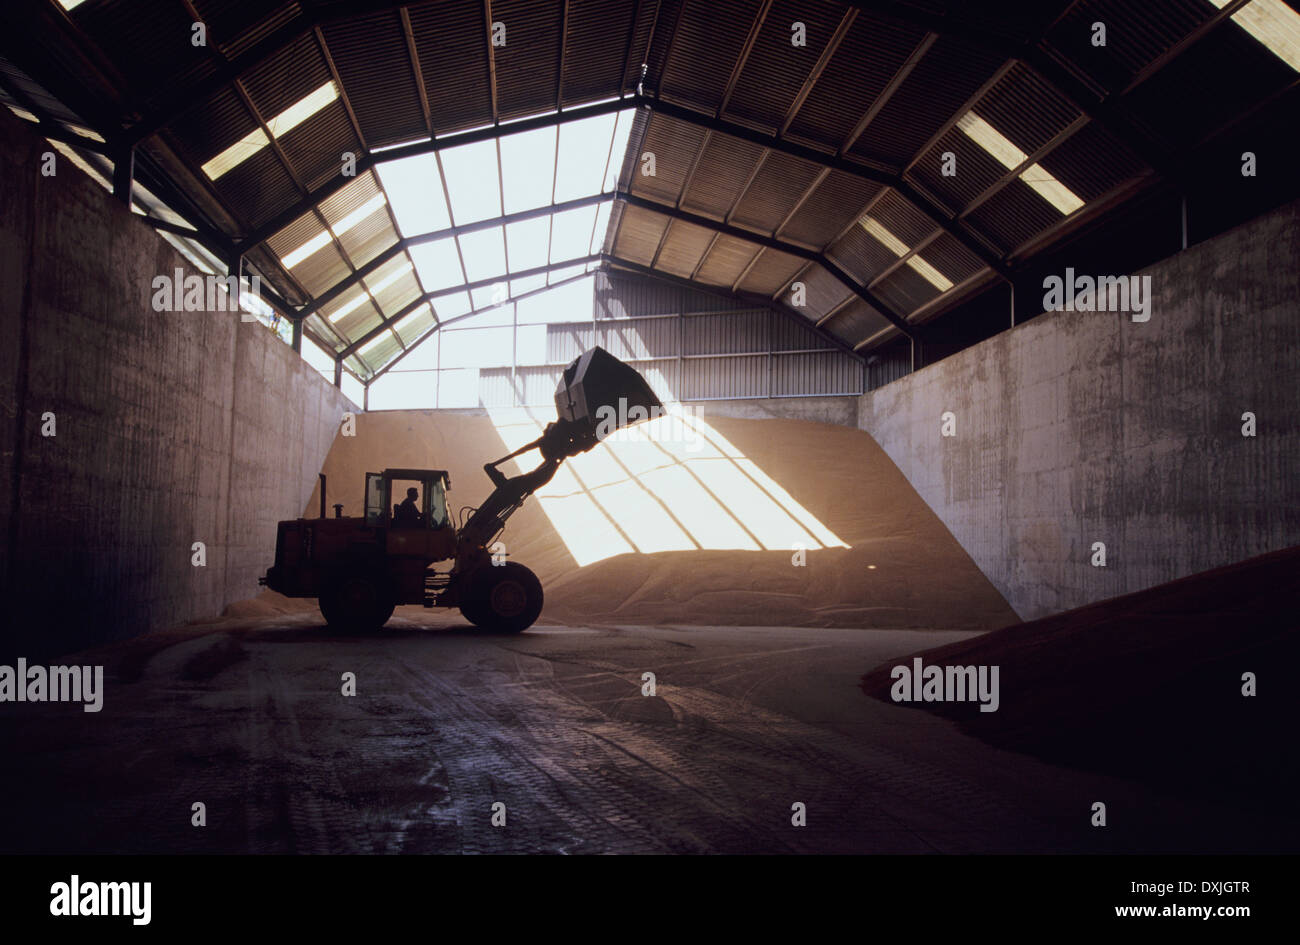 Front-end loader in grain warehouse Stock Photo